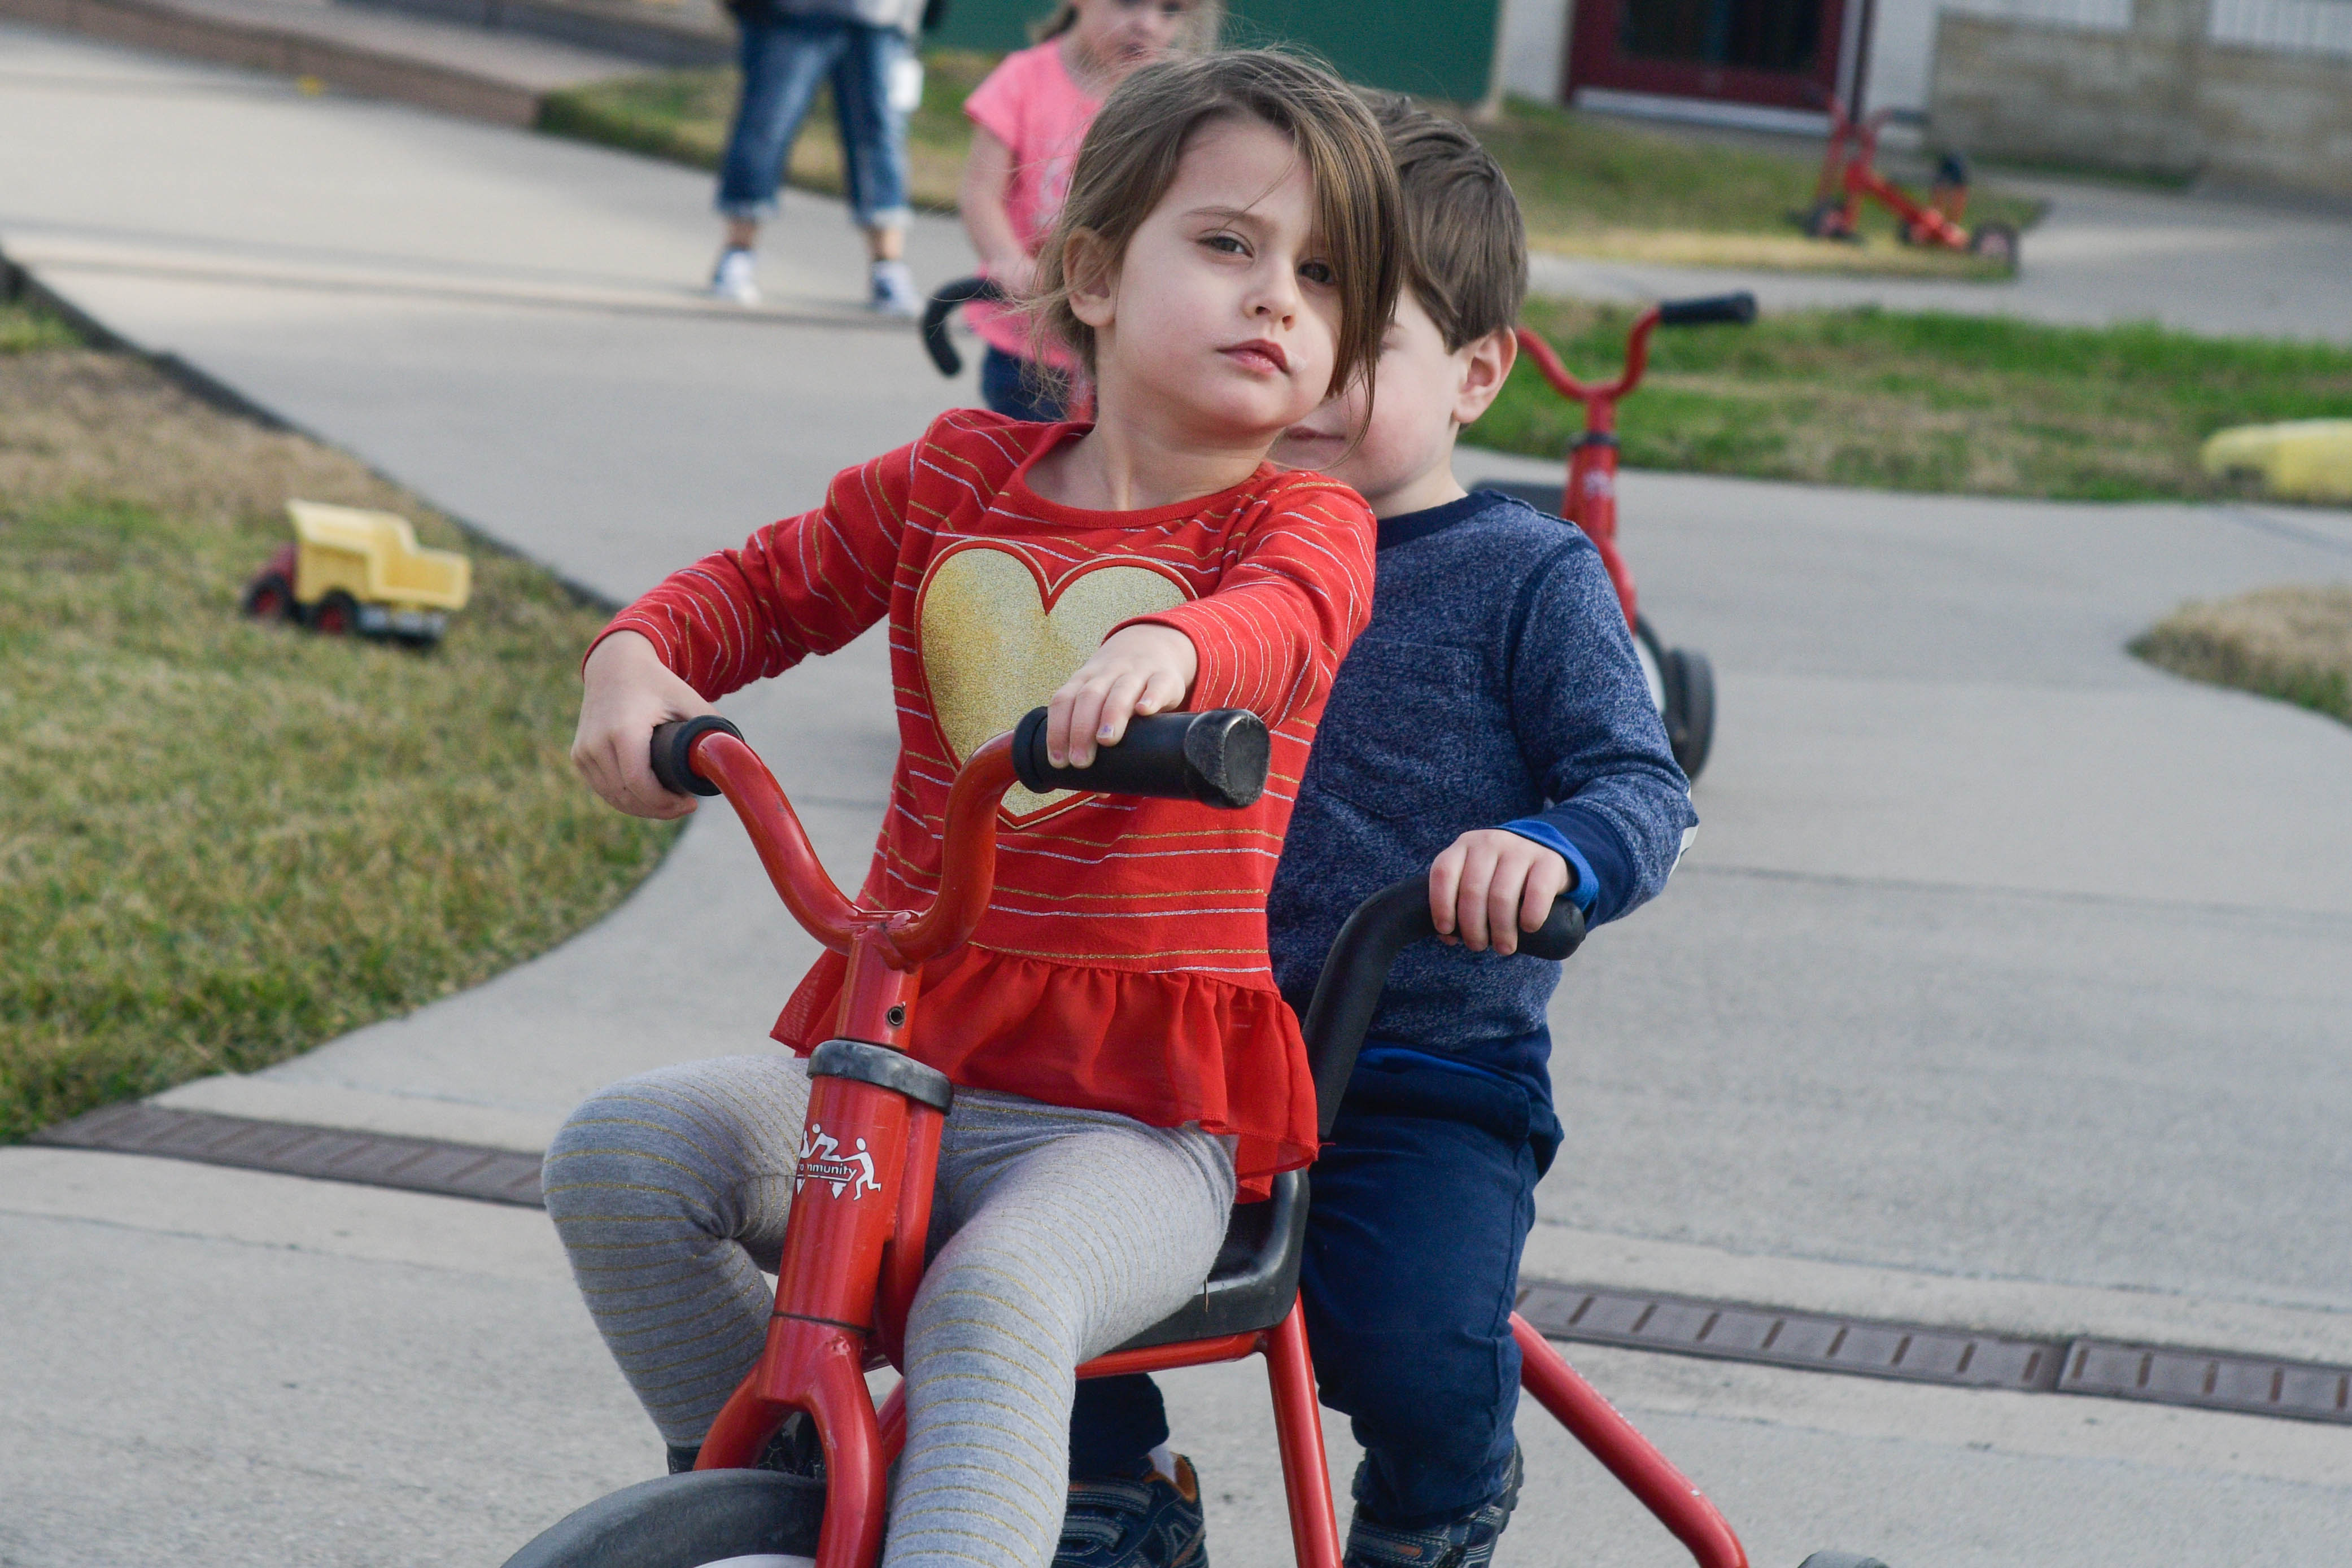 A young girl and boy ride a bicycle together outside the Center for Early Learning